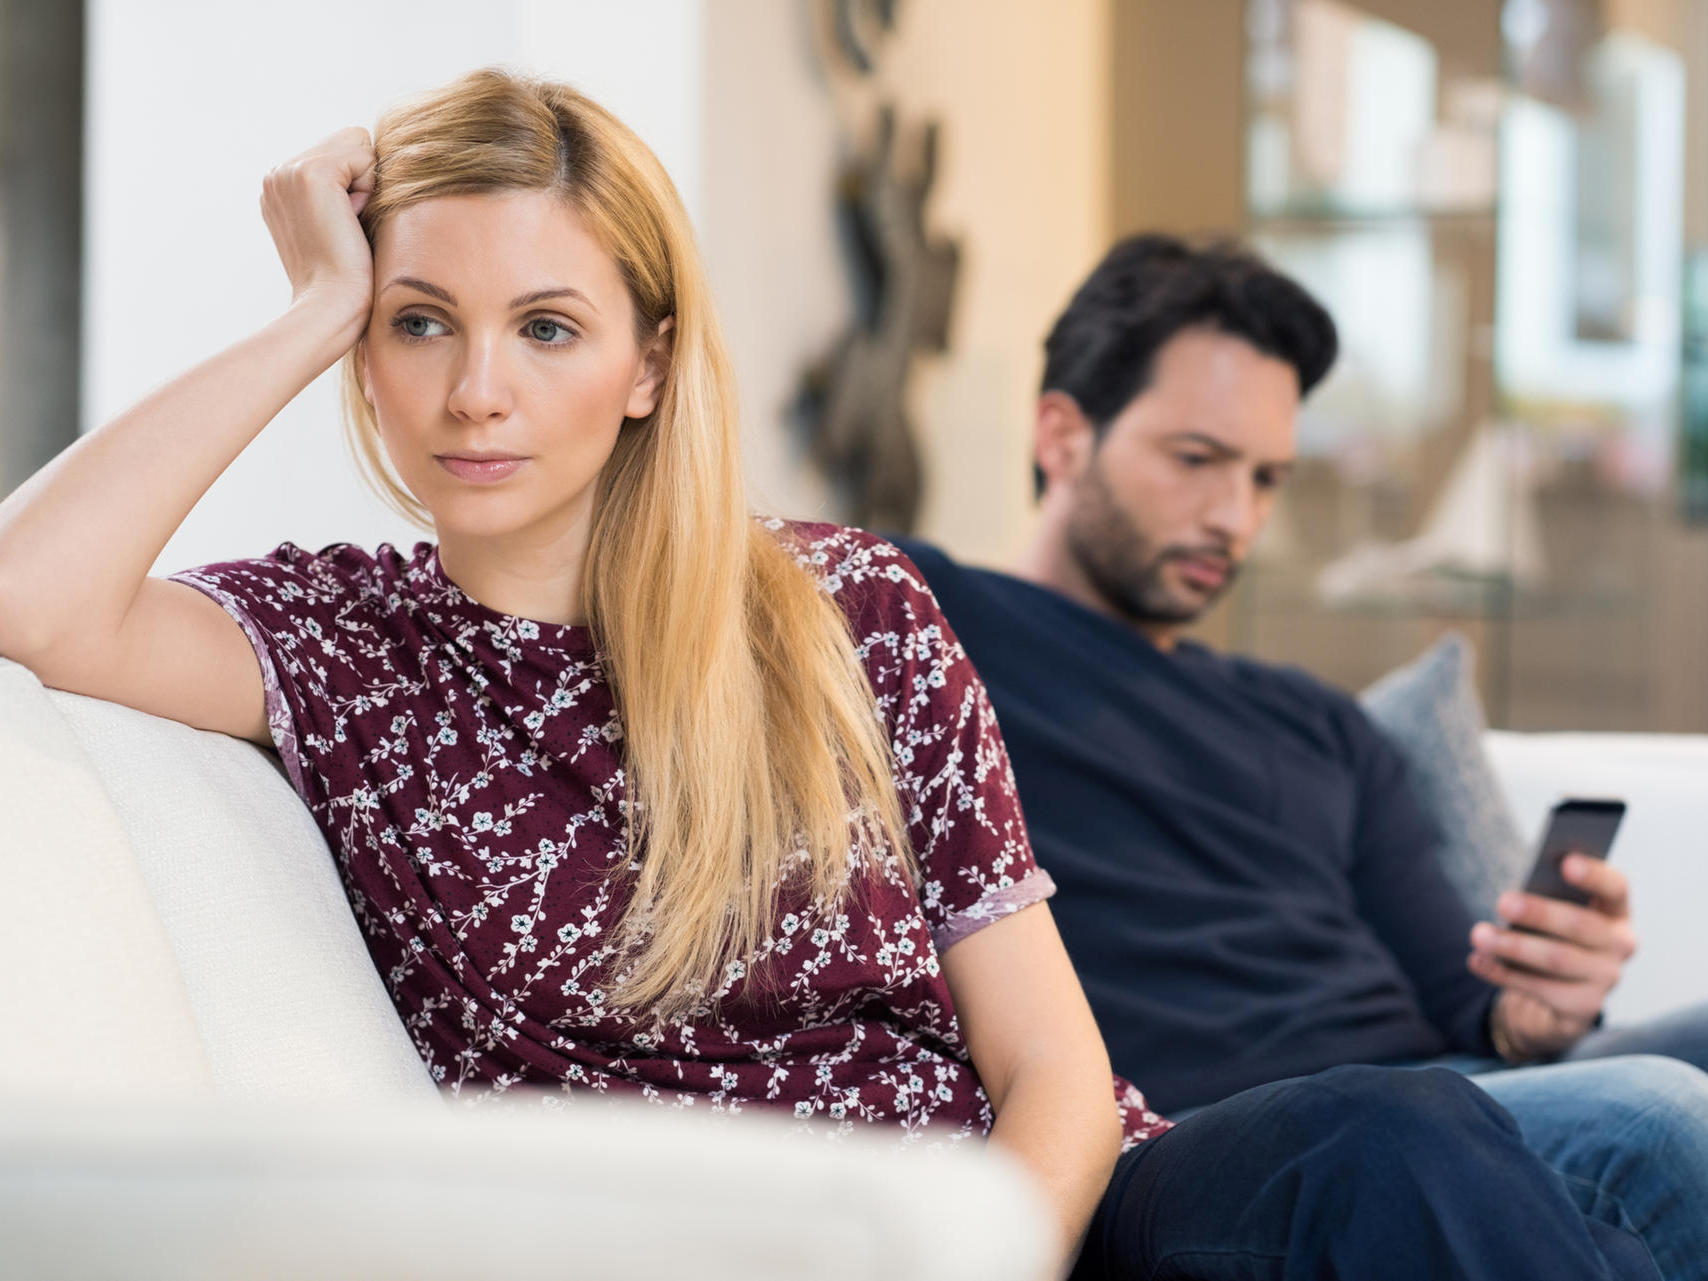 Young woman getting bored while man using phone in the background. Beautiful young woman feeling annoyed as man texting on phone. Young woman after an argument with her boyfriend in their living room.